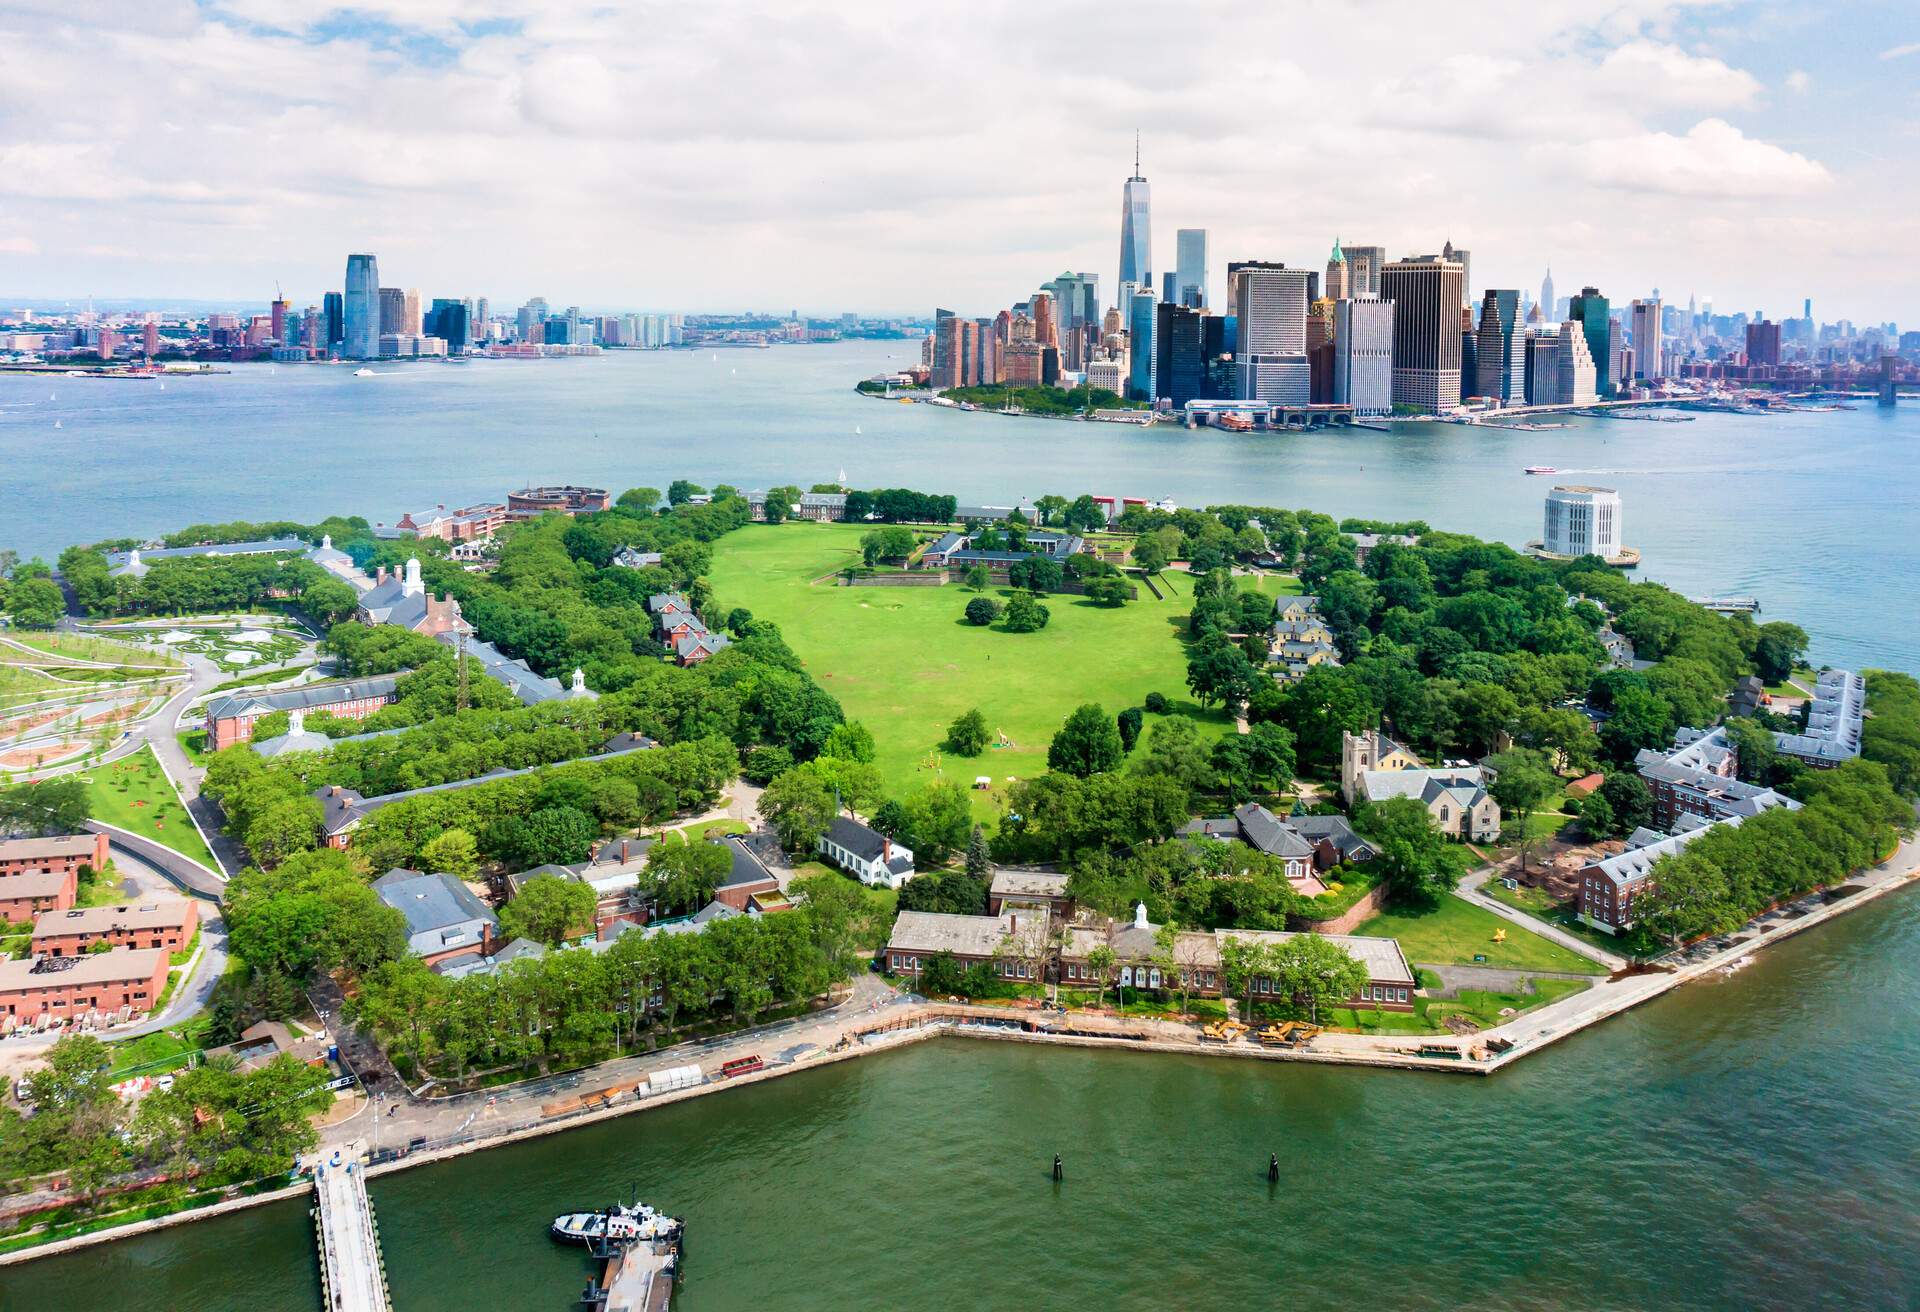 DEST_USA_NY_NYC_GOVERNORS-ISLAND_GettyImages-503124739